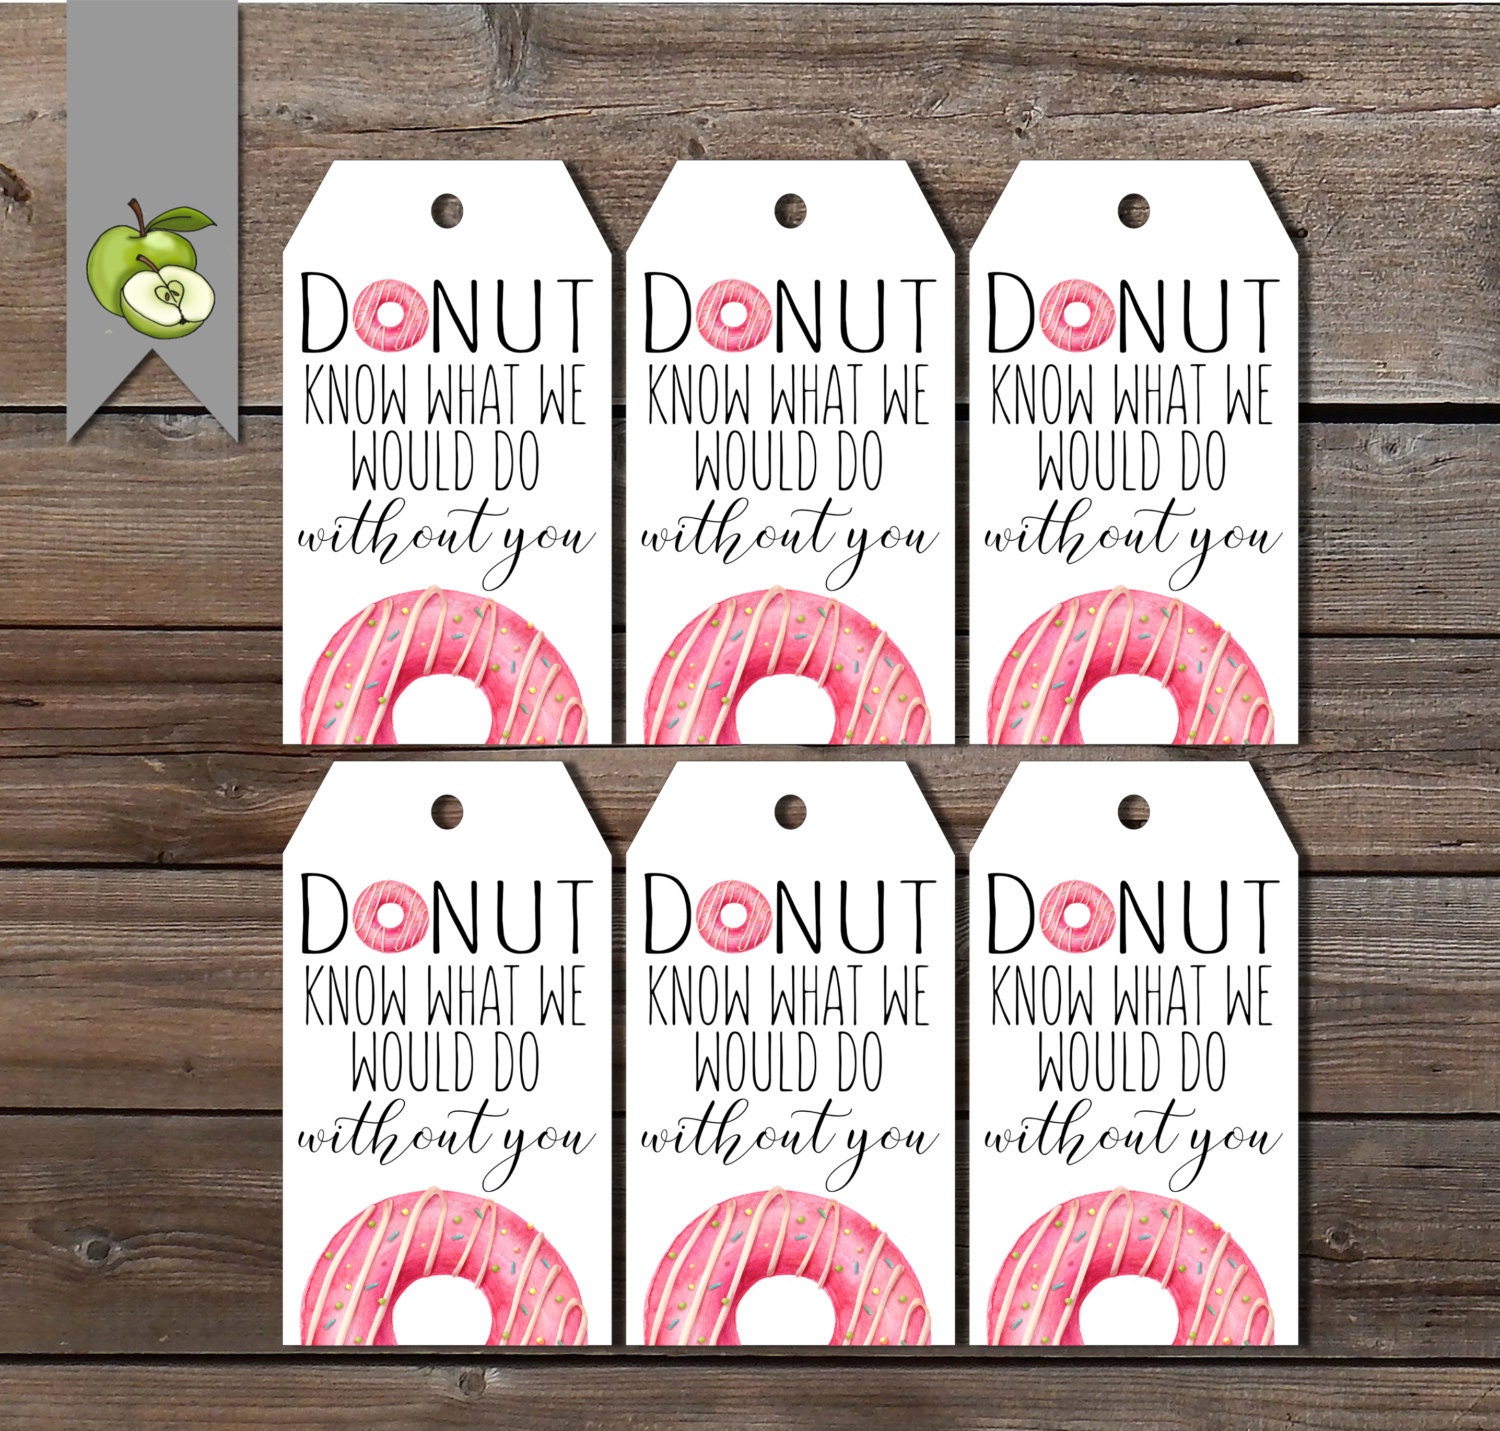 free-printable-donut-thank-you-tags-printable-word-searches